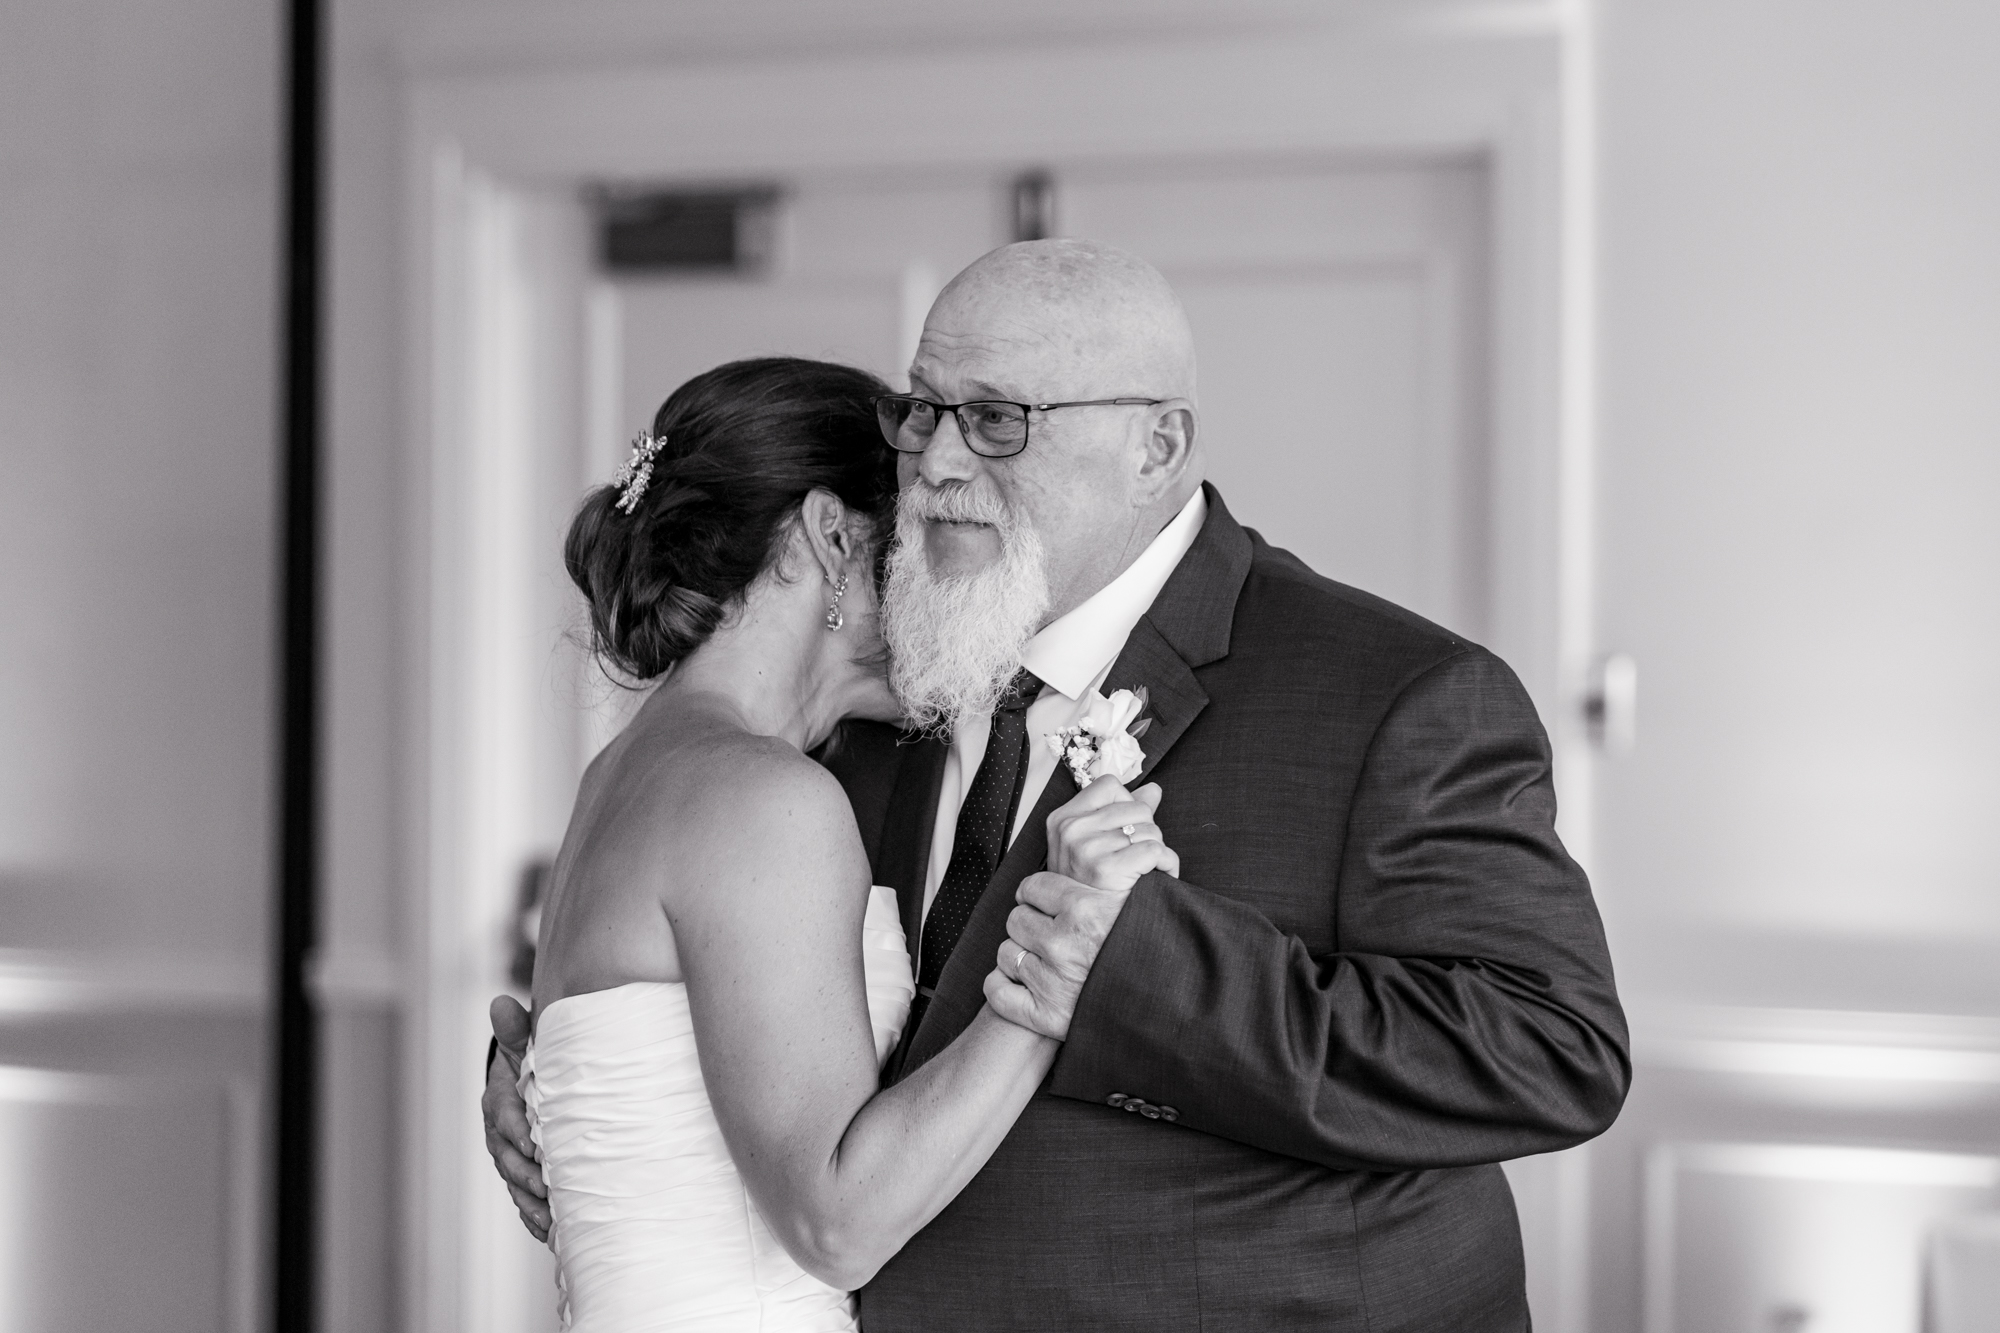 father daughter dance at a wedding reception